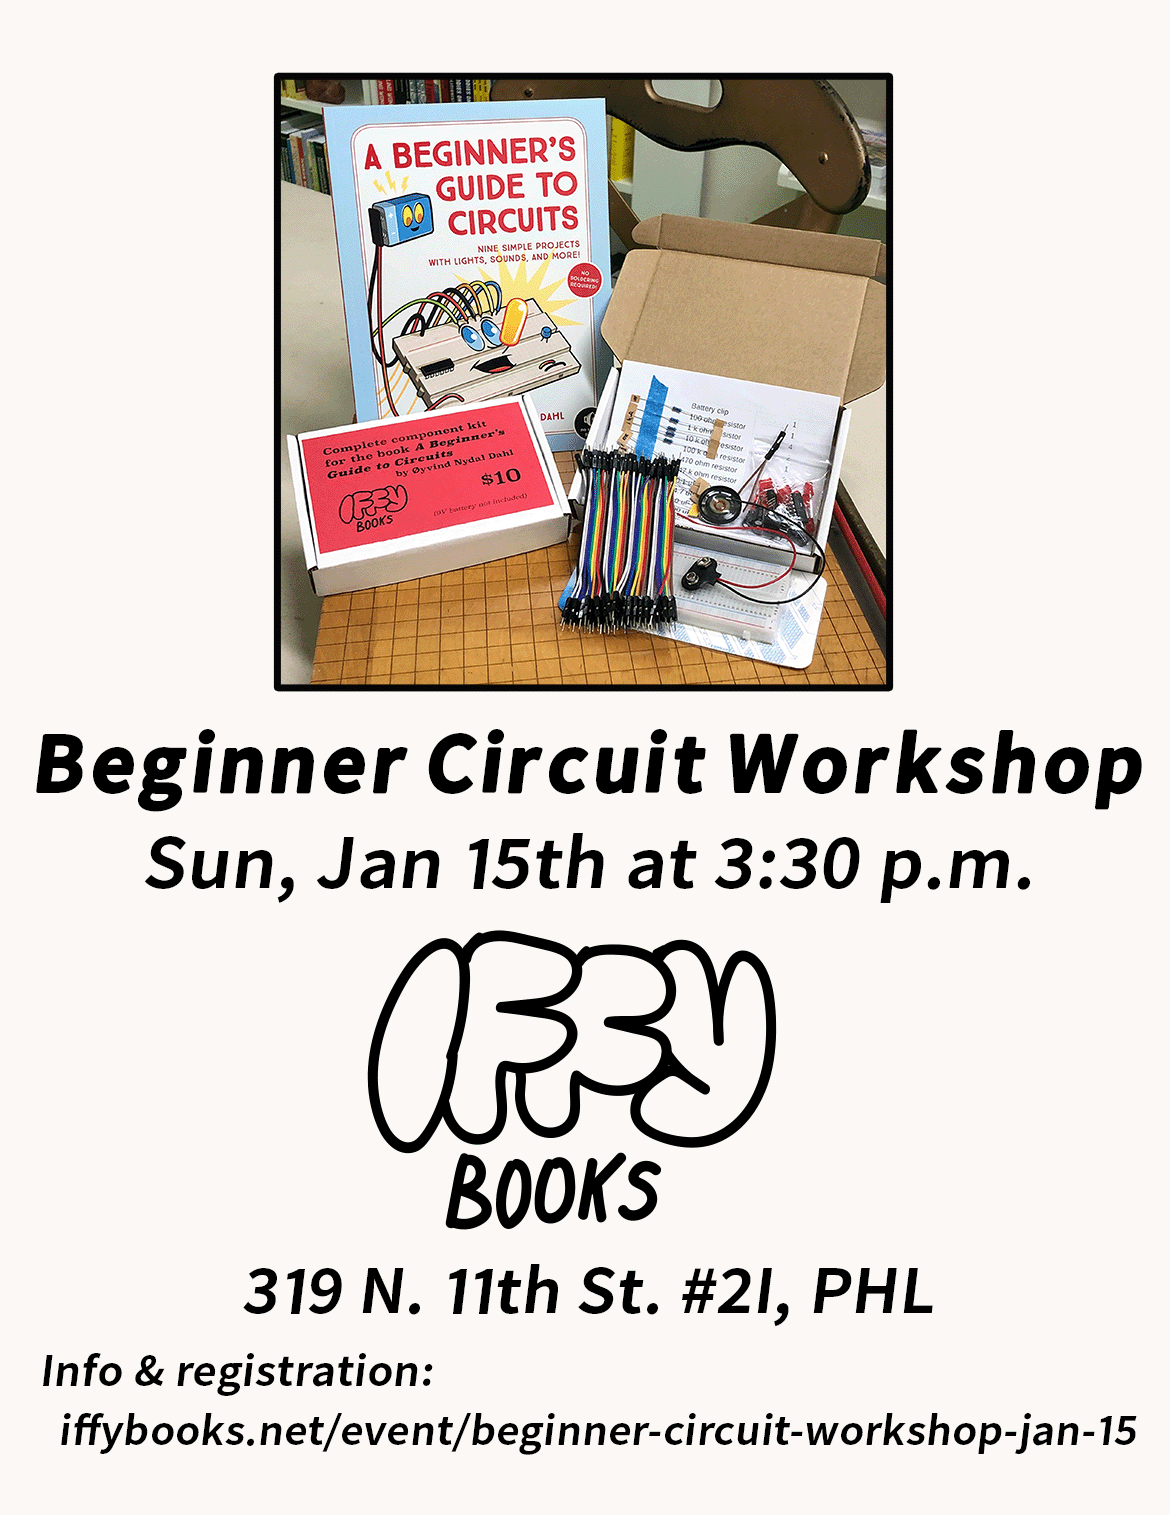 Flyer with a photo of an electronics kit next to a book called "A Beginner's Guide to Circuits," with the following text: Beginner Circuit Workshop Sun, Jan 15th at 3:30 p.m. Iffy Books 319 N. 11th St. #2I, PHL Info & registration: iffybooks.net/event/beginner-circuit-workshop-jan-15